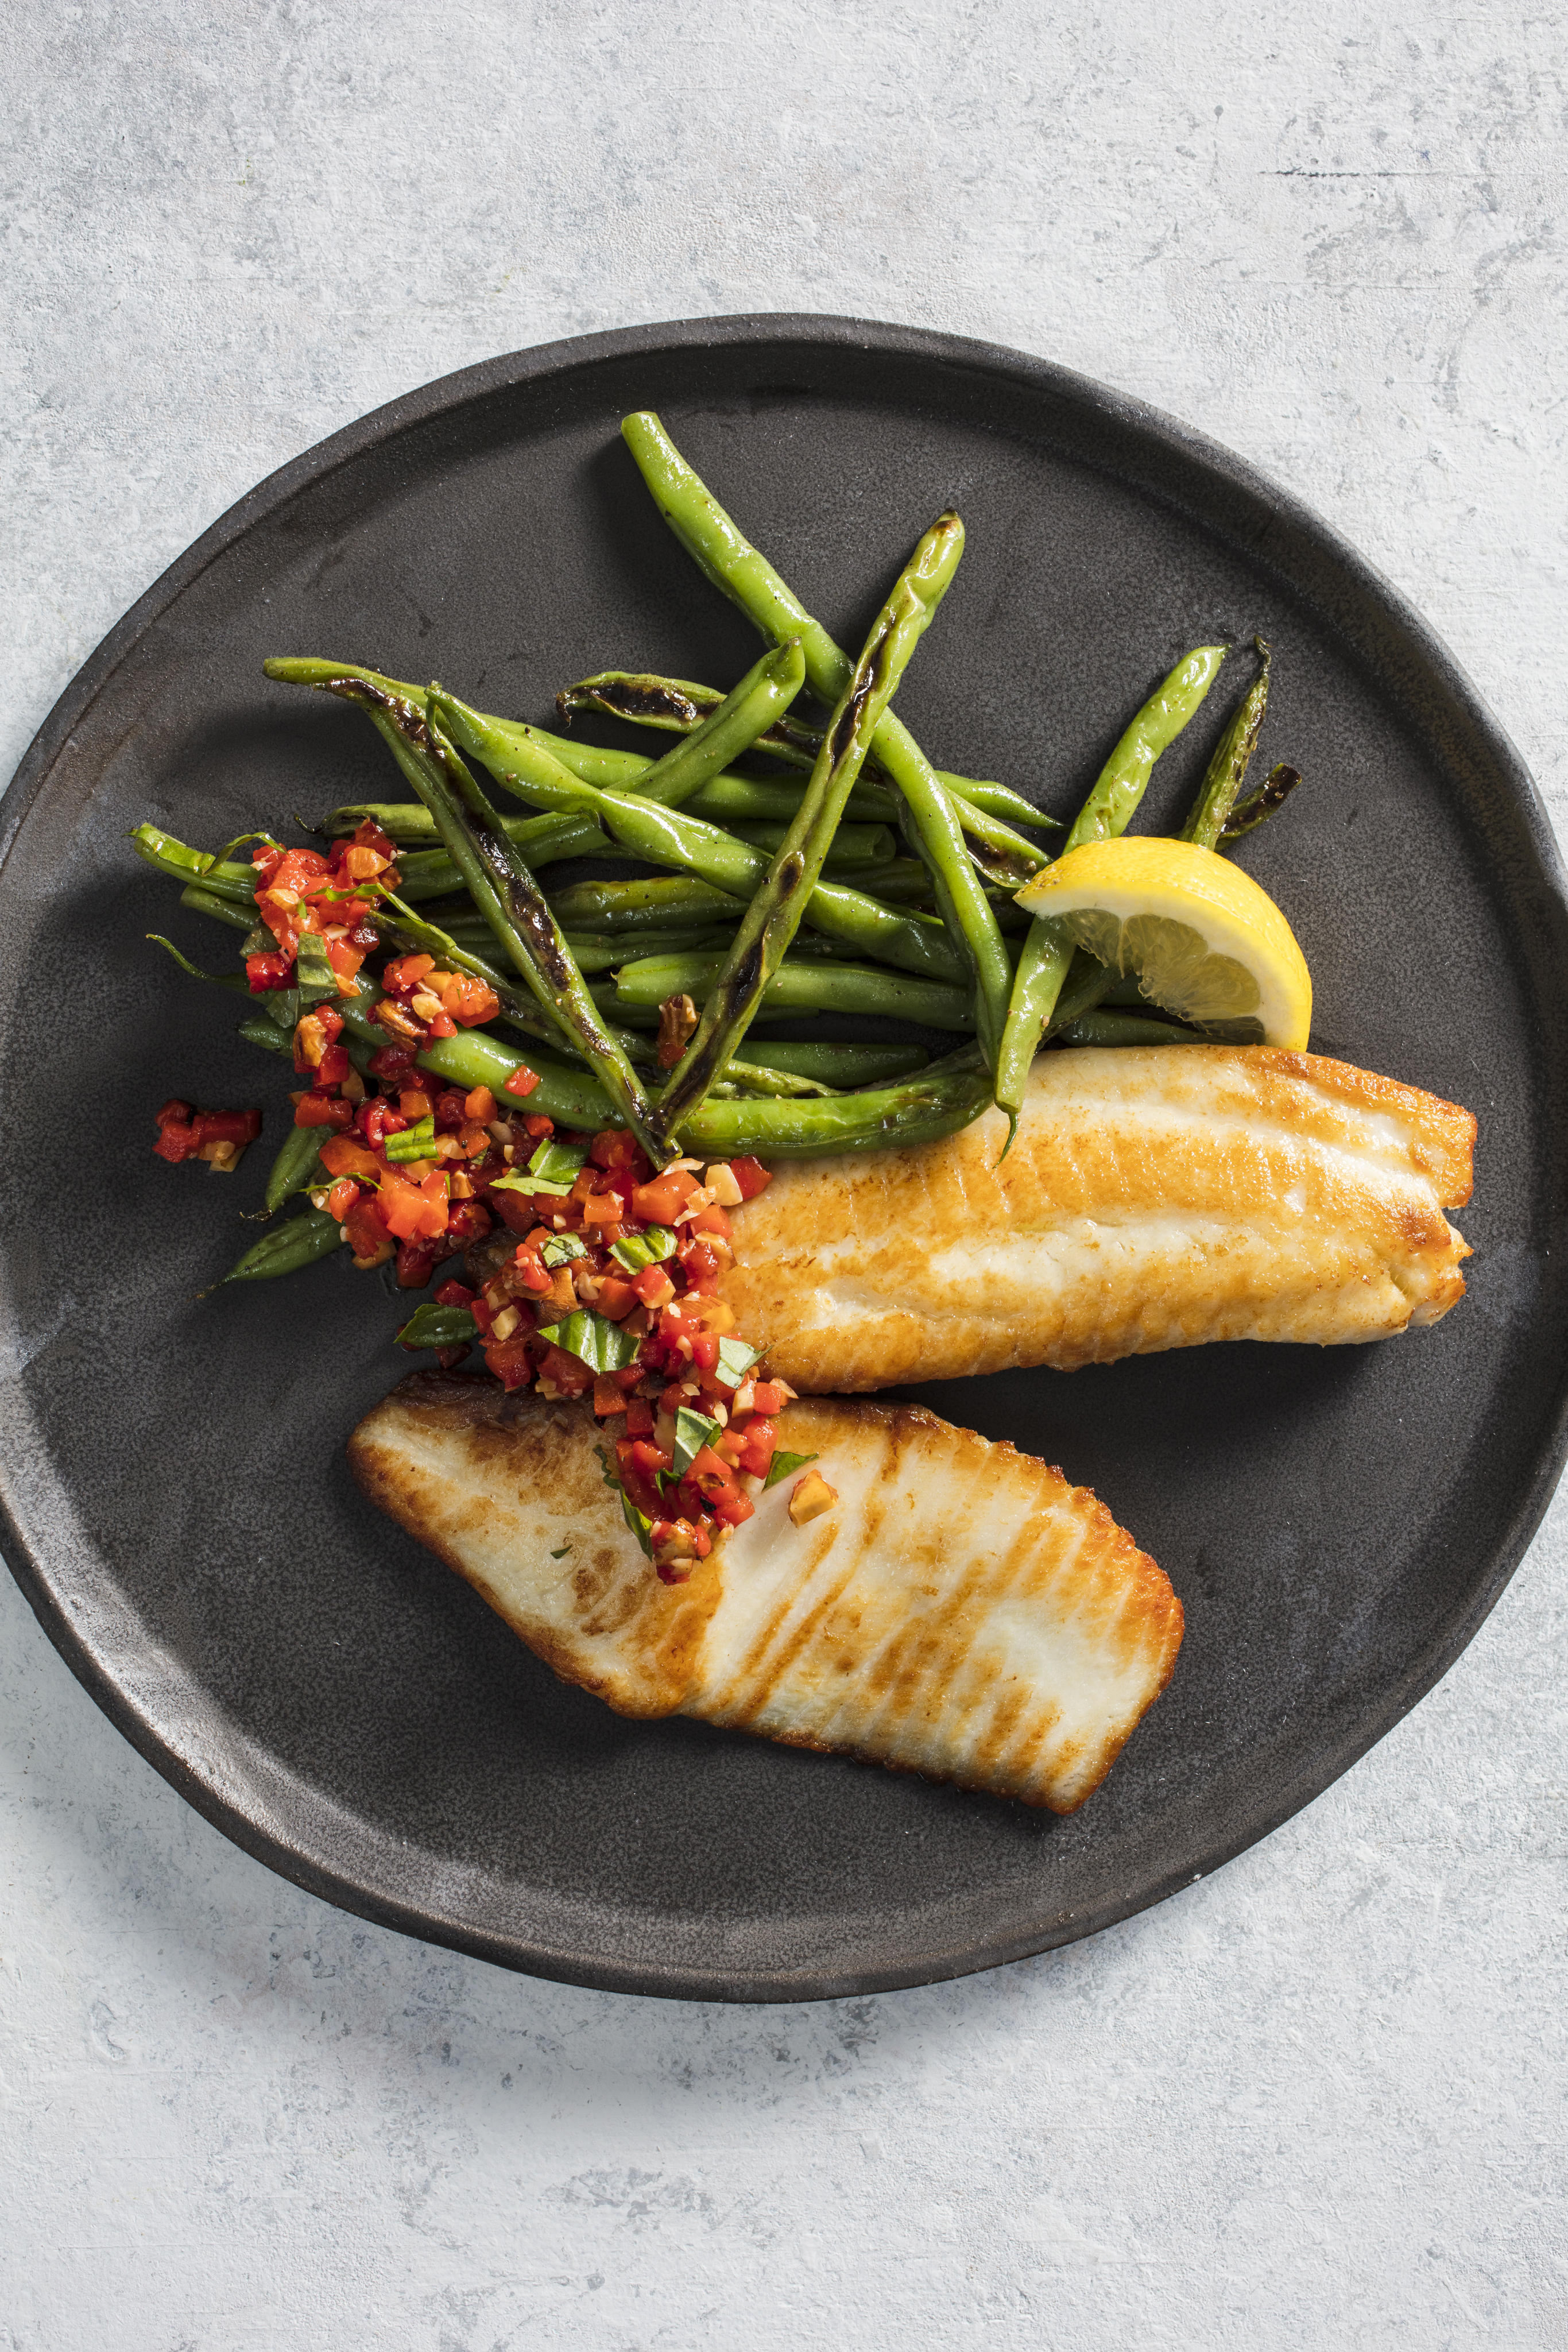 Pan-seared tilapia with blistered green beans and red pepper relish.